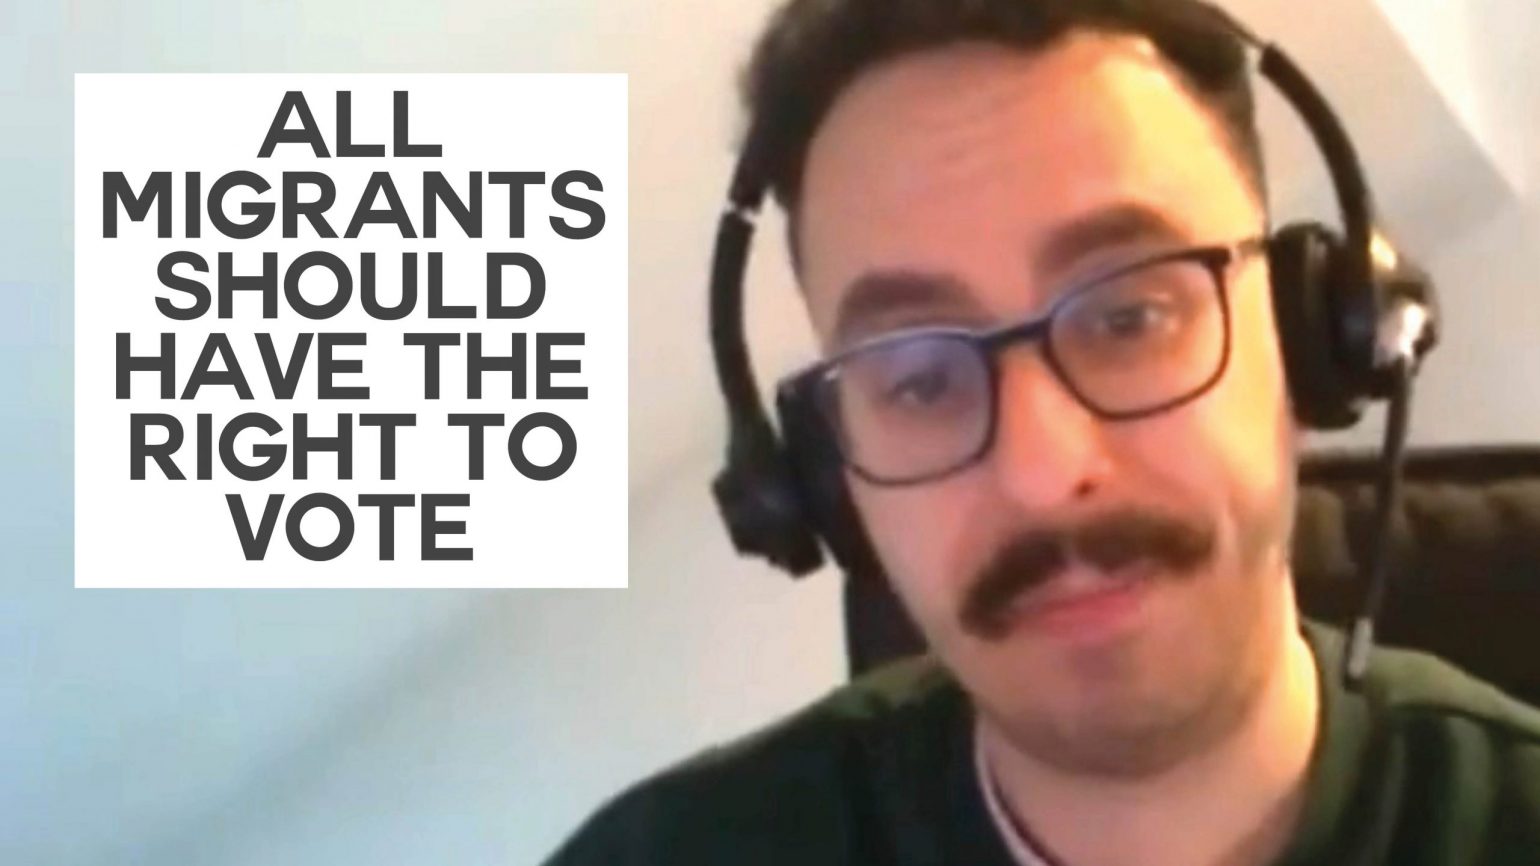 A still of an interview with Green Party migration spokesperson Benali Hamdache with text overlaid reading "All migrants should have the right to vote"